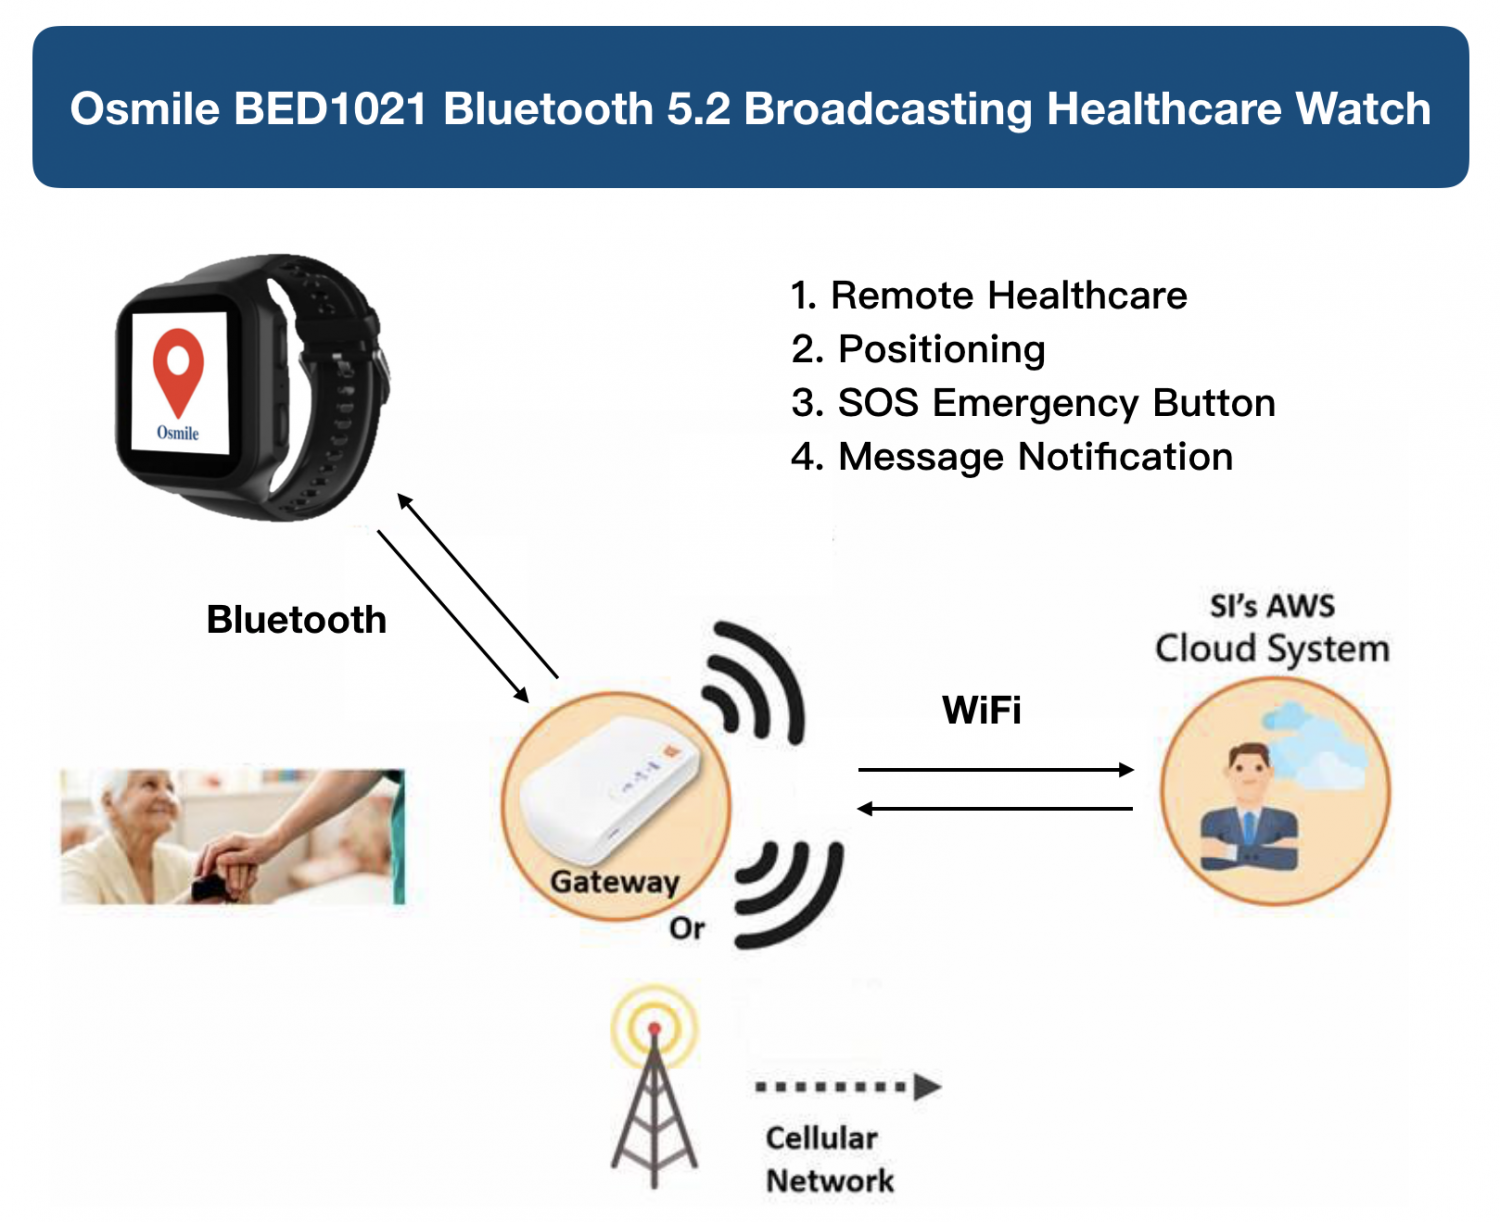 Osmile BED1021 Bluetooth 5.2 Broadcasting Healthcare Watch